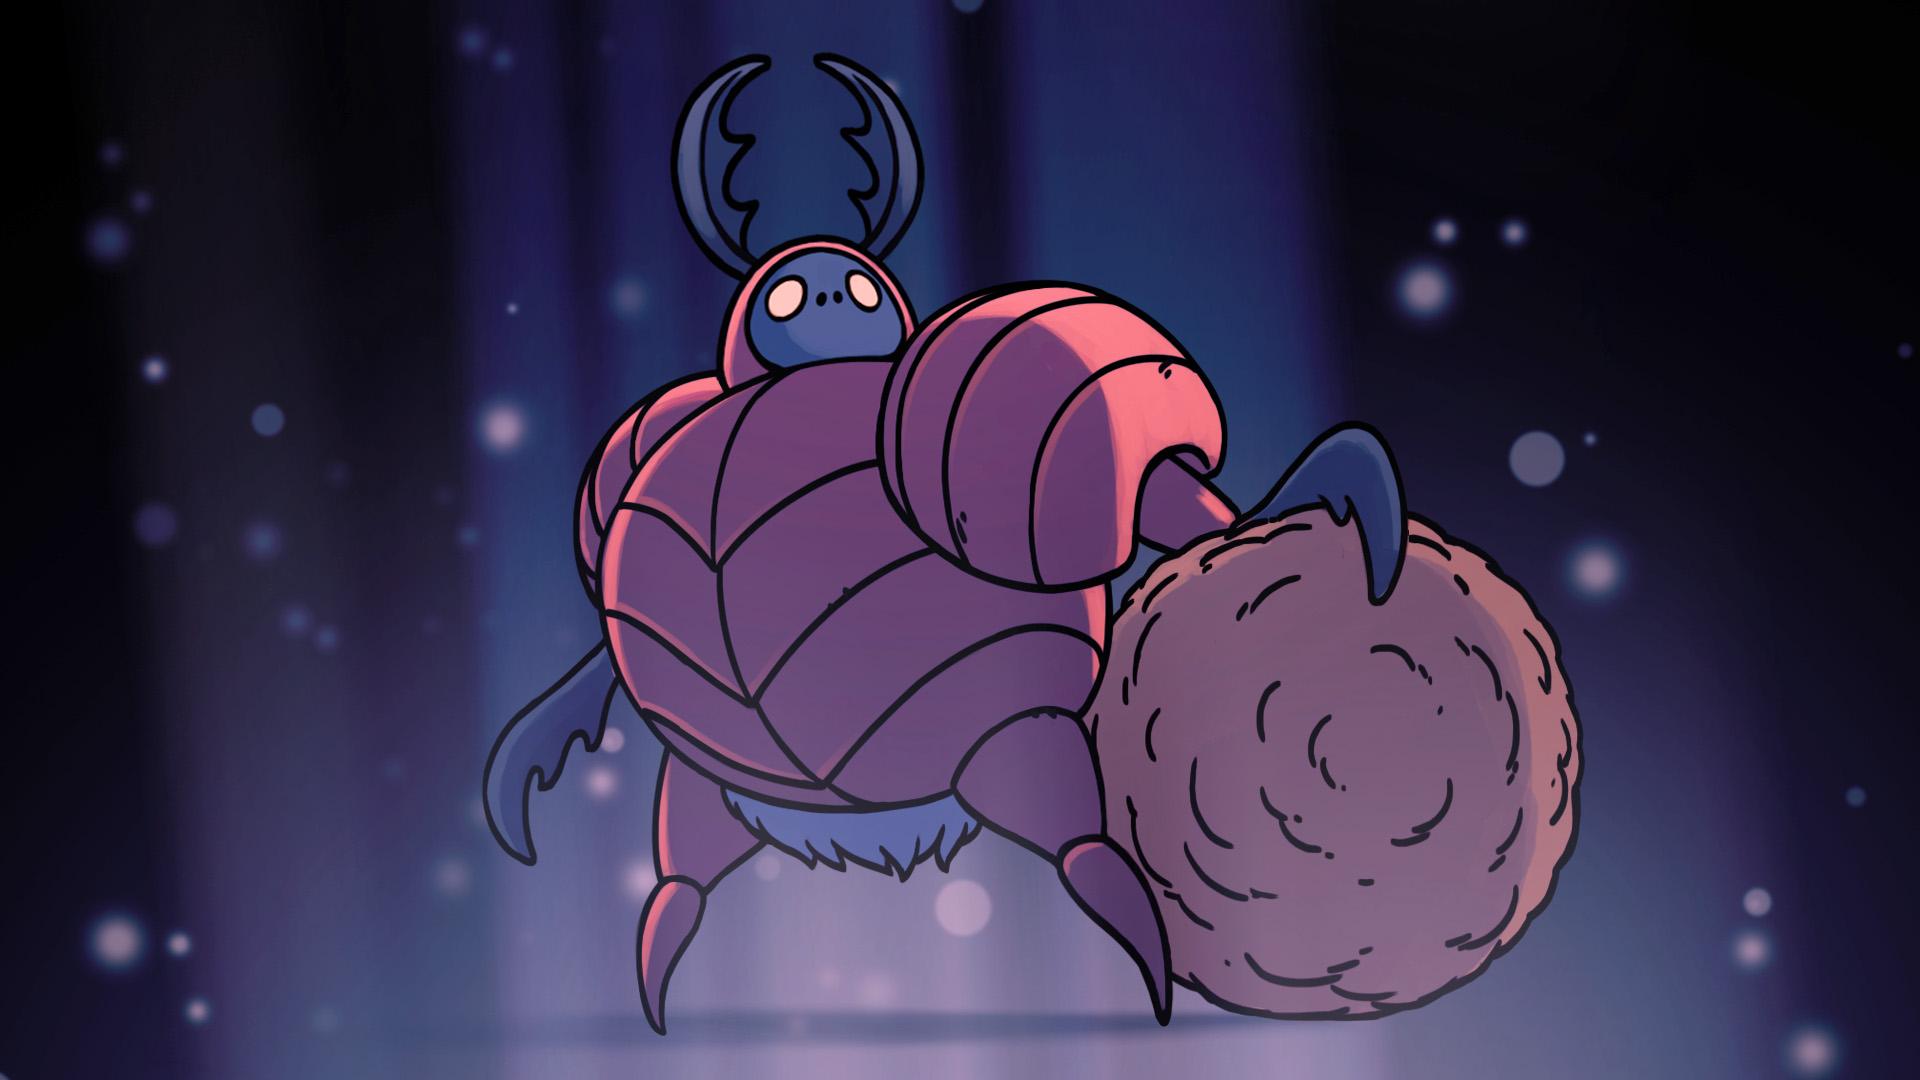 Dung Defender - Hollow knight